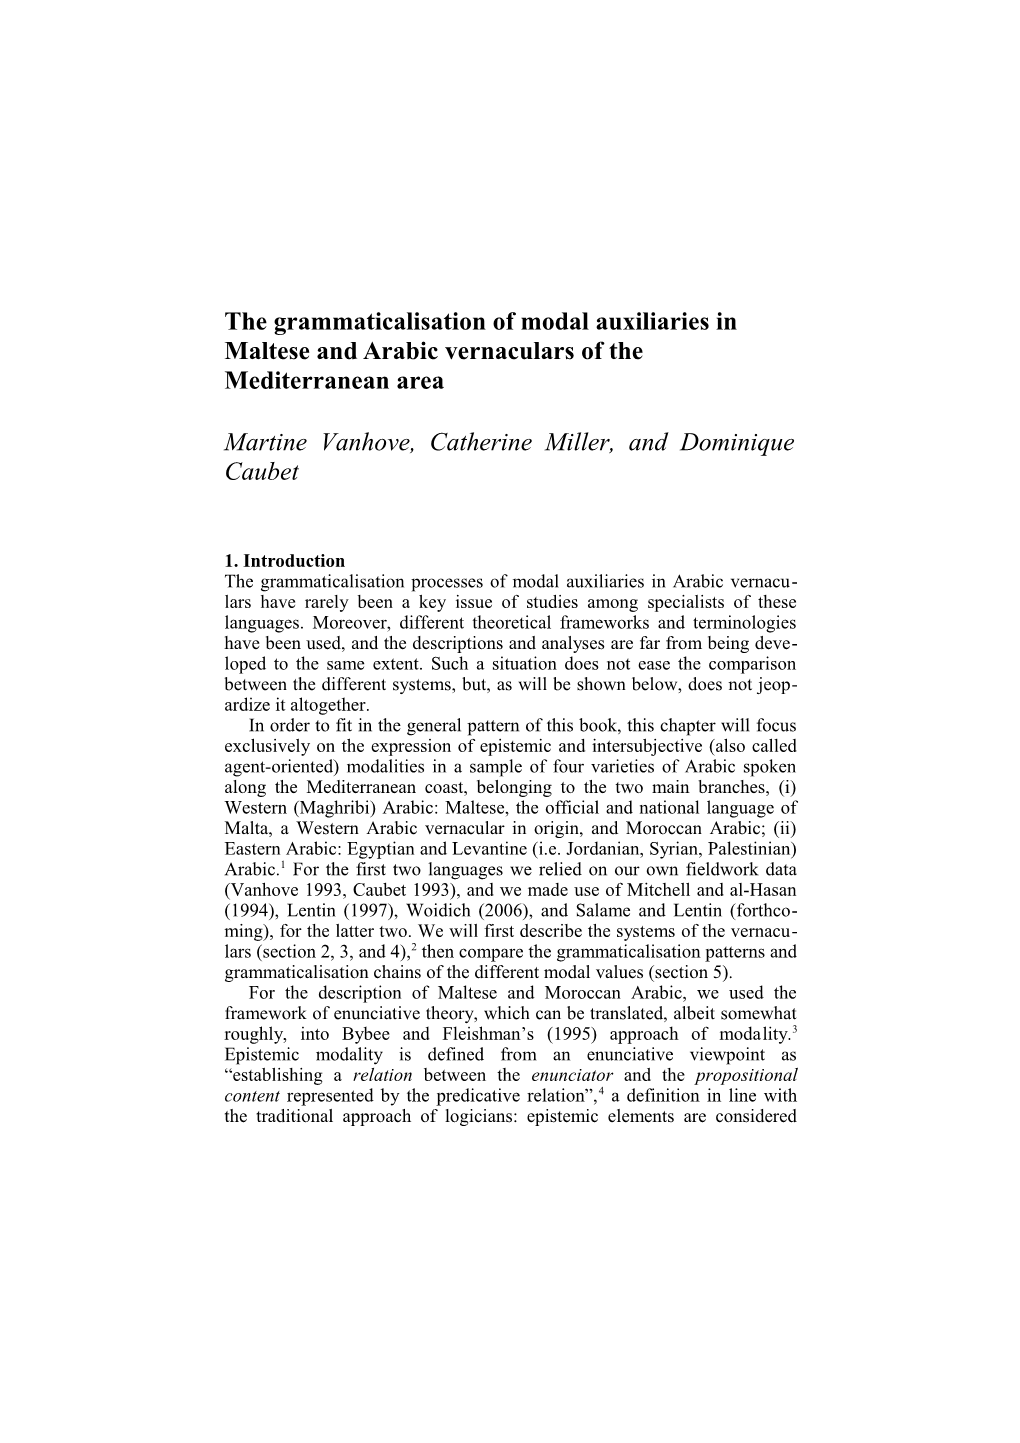 The Grammaticalization of Modal Auxiliaries in Maltese and in Arabic Vernaculars of The